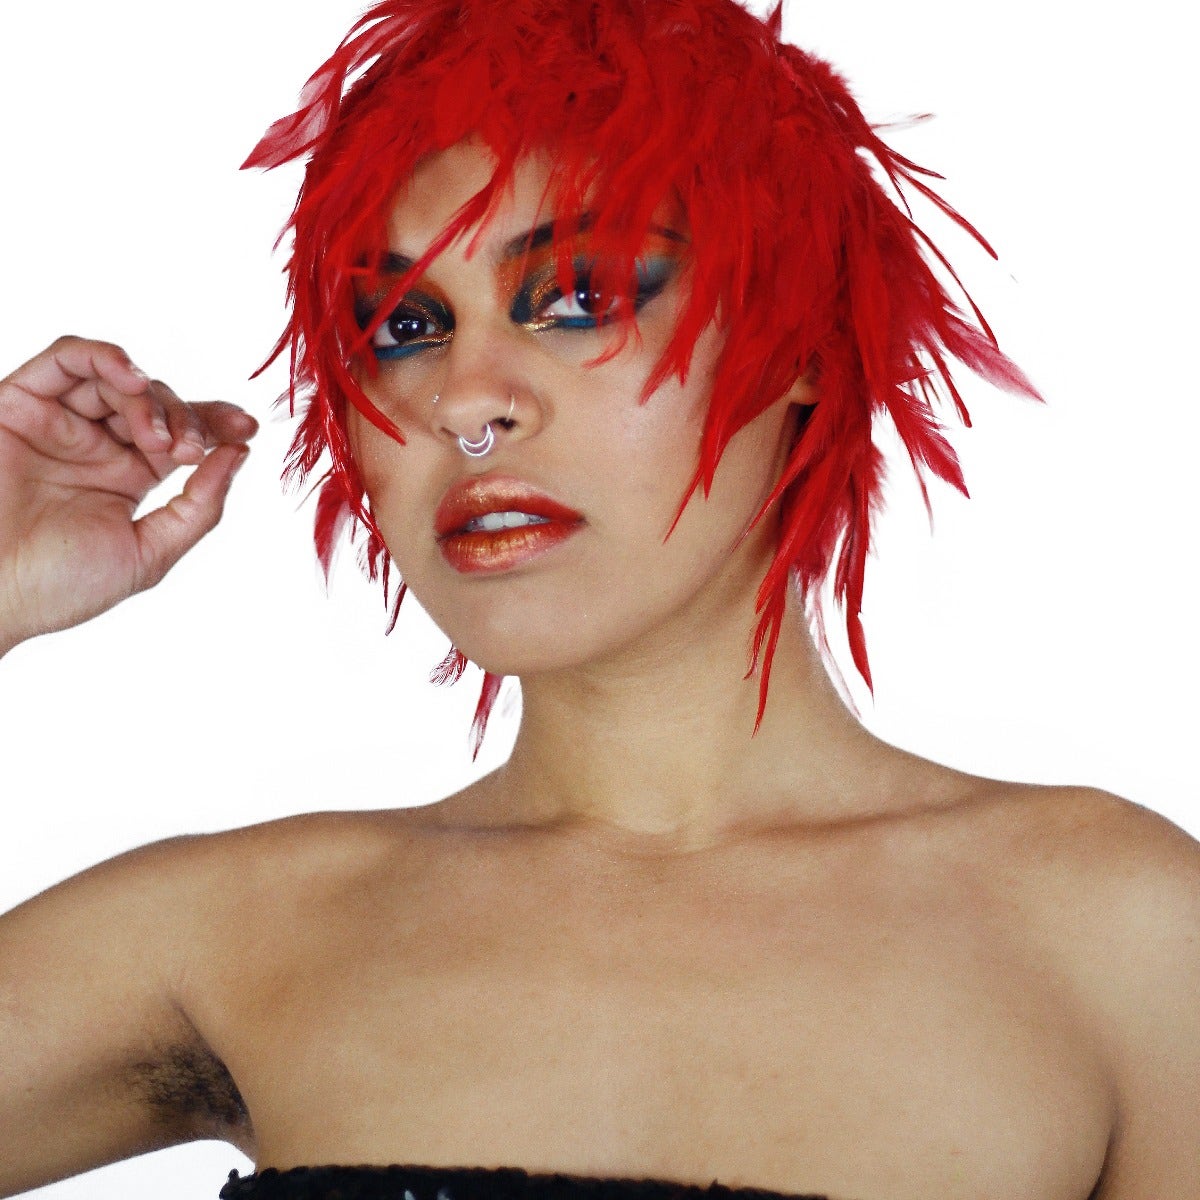 Hackle Feather Wig-Solid - Red